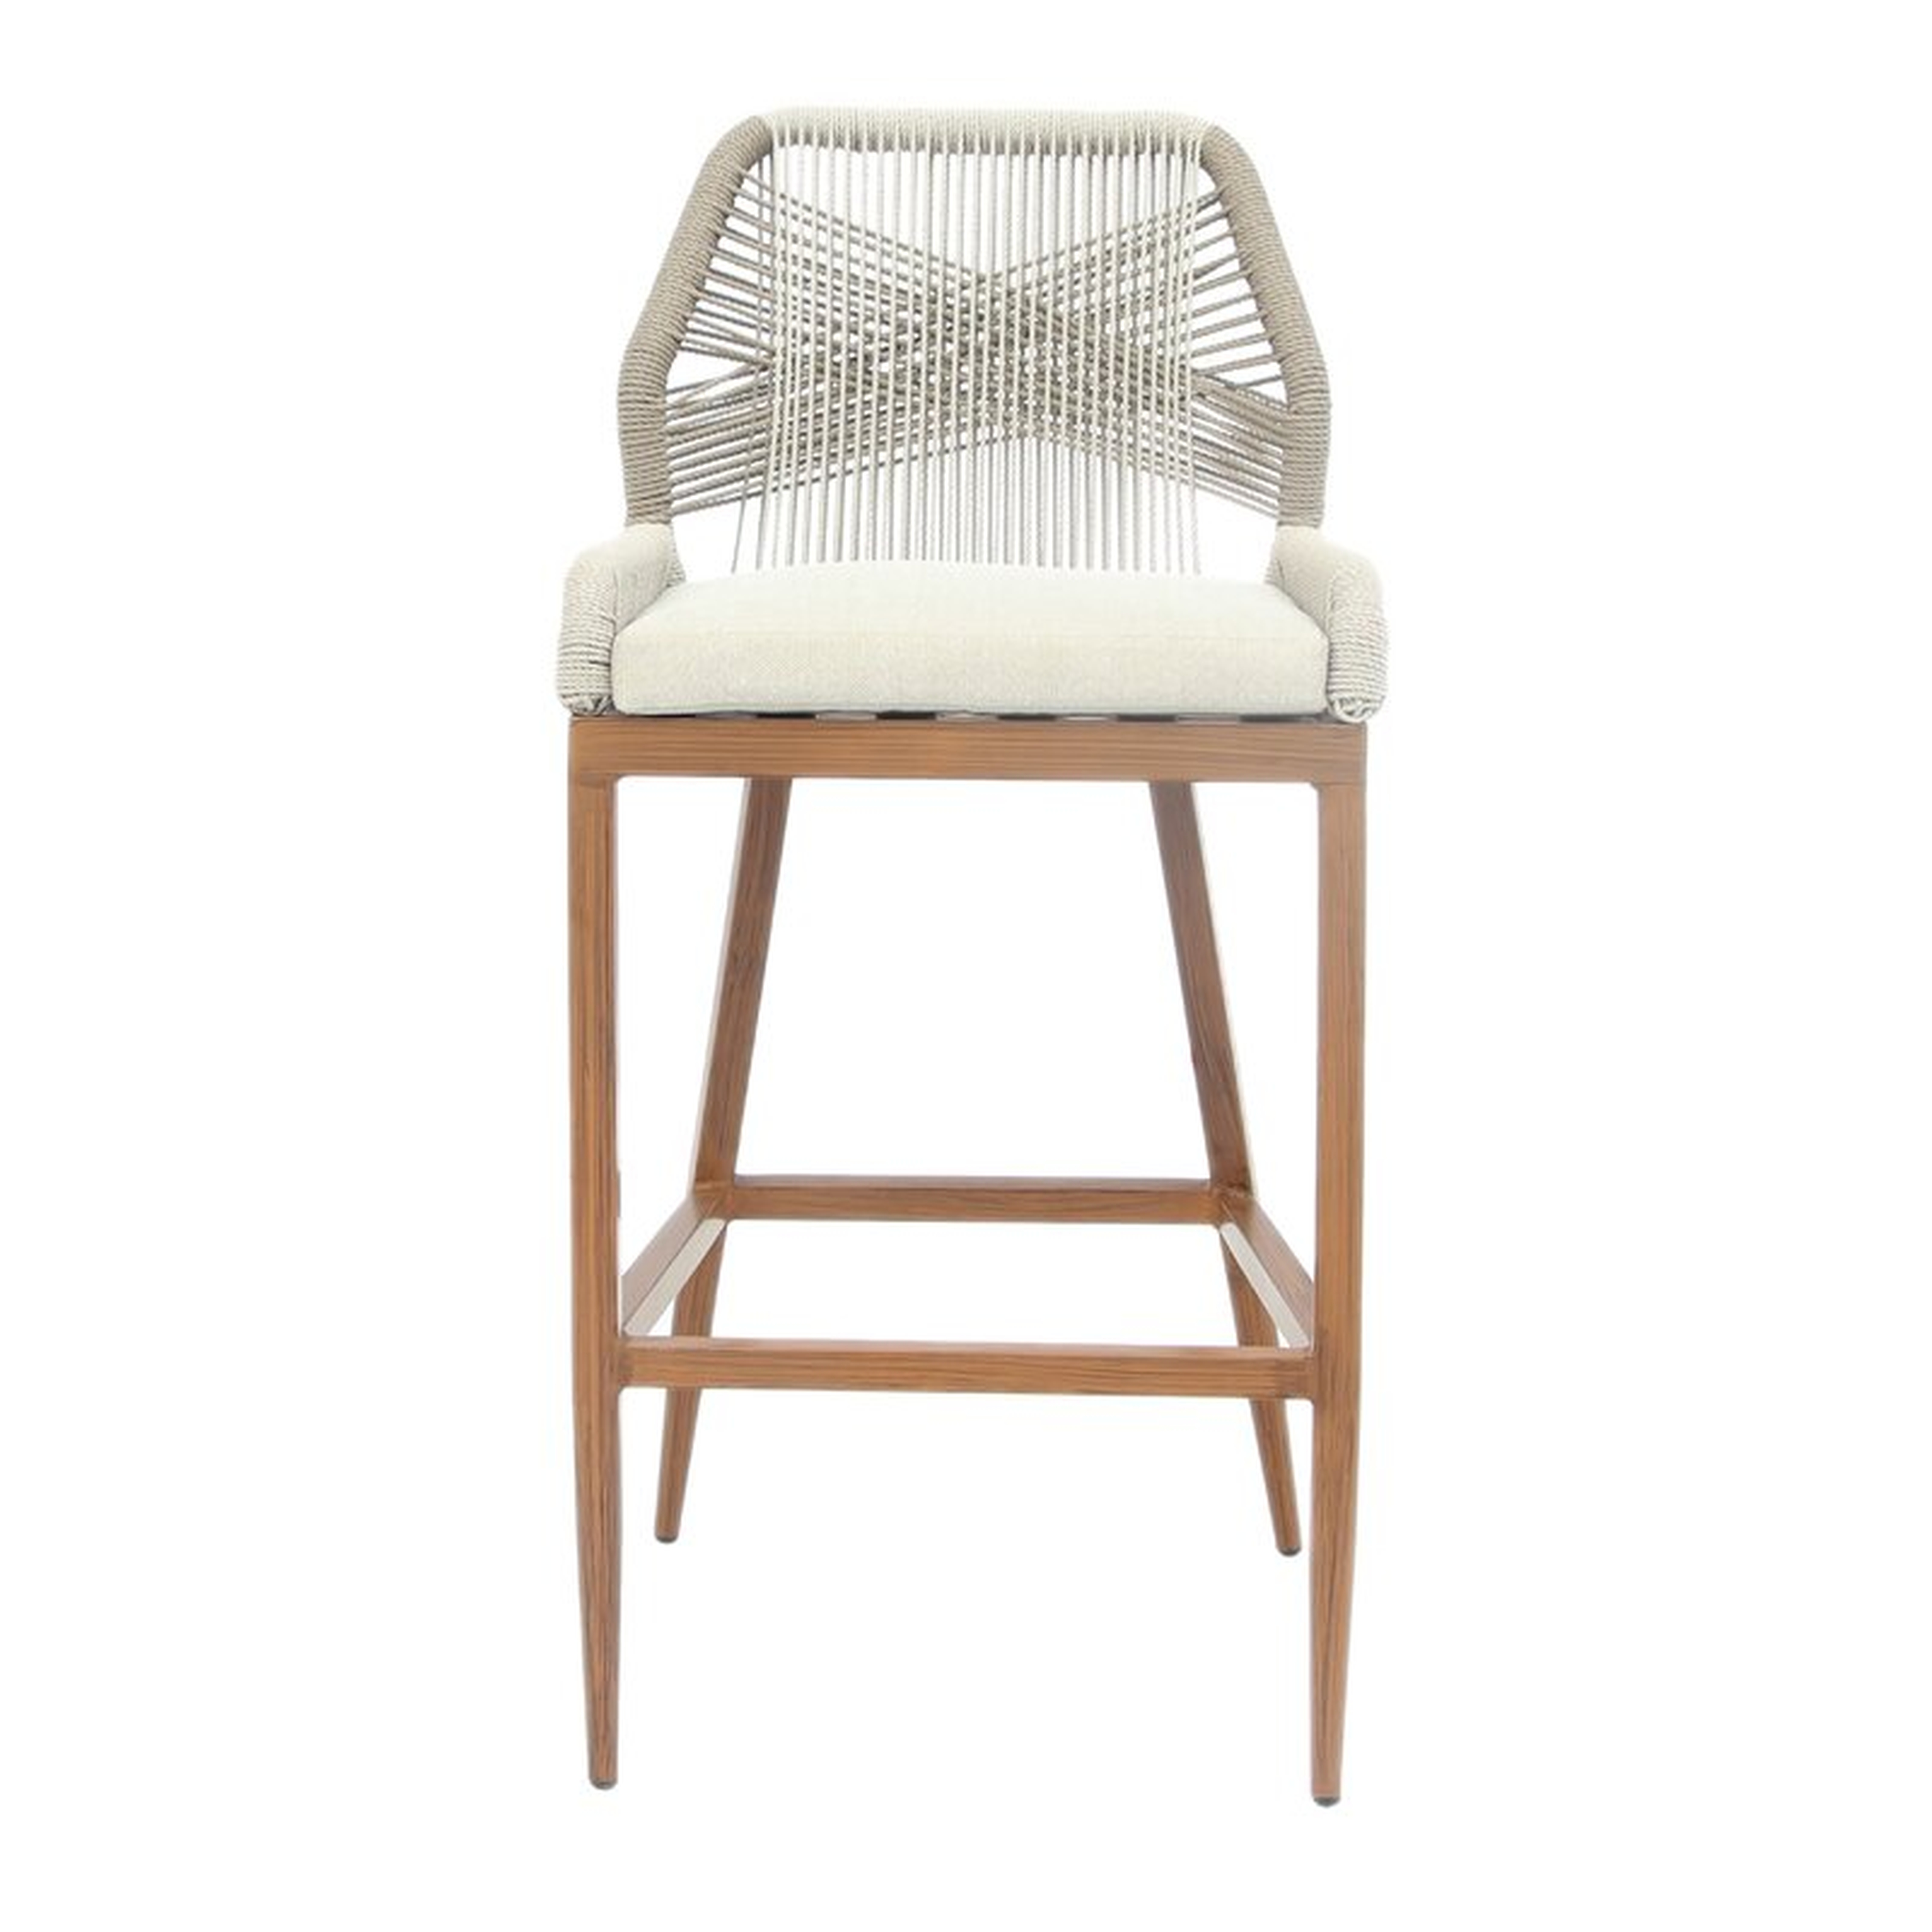 Bess Patio Counter Stool with Cushion Counter height 25" - Wayfair